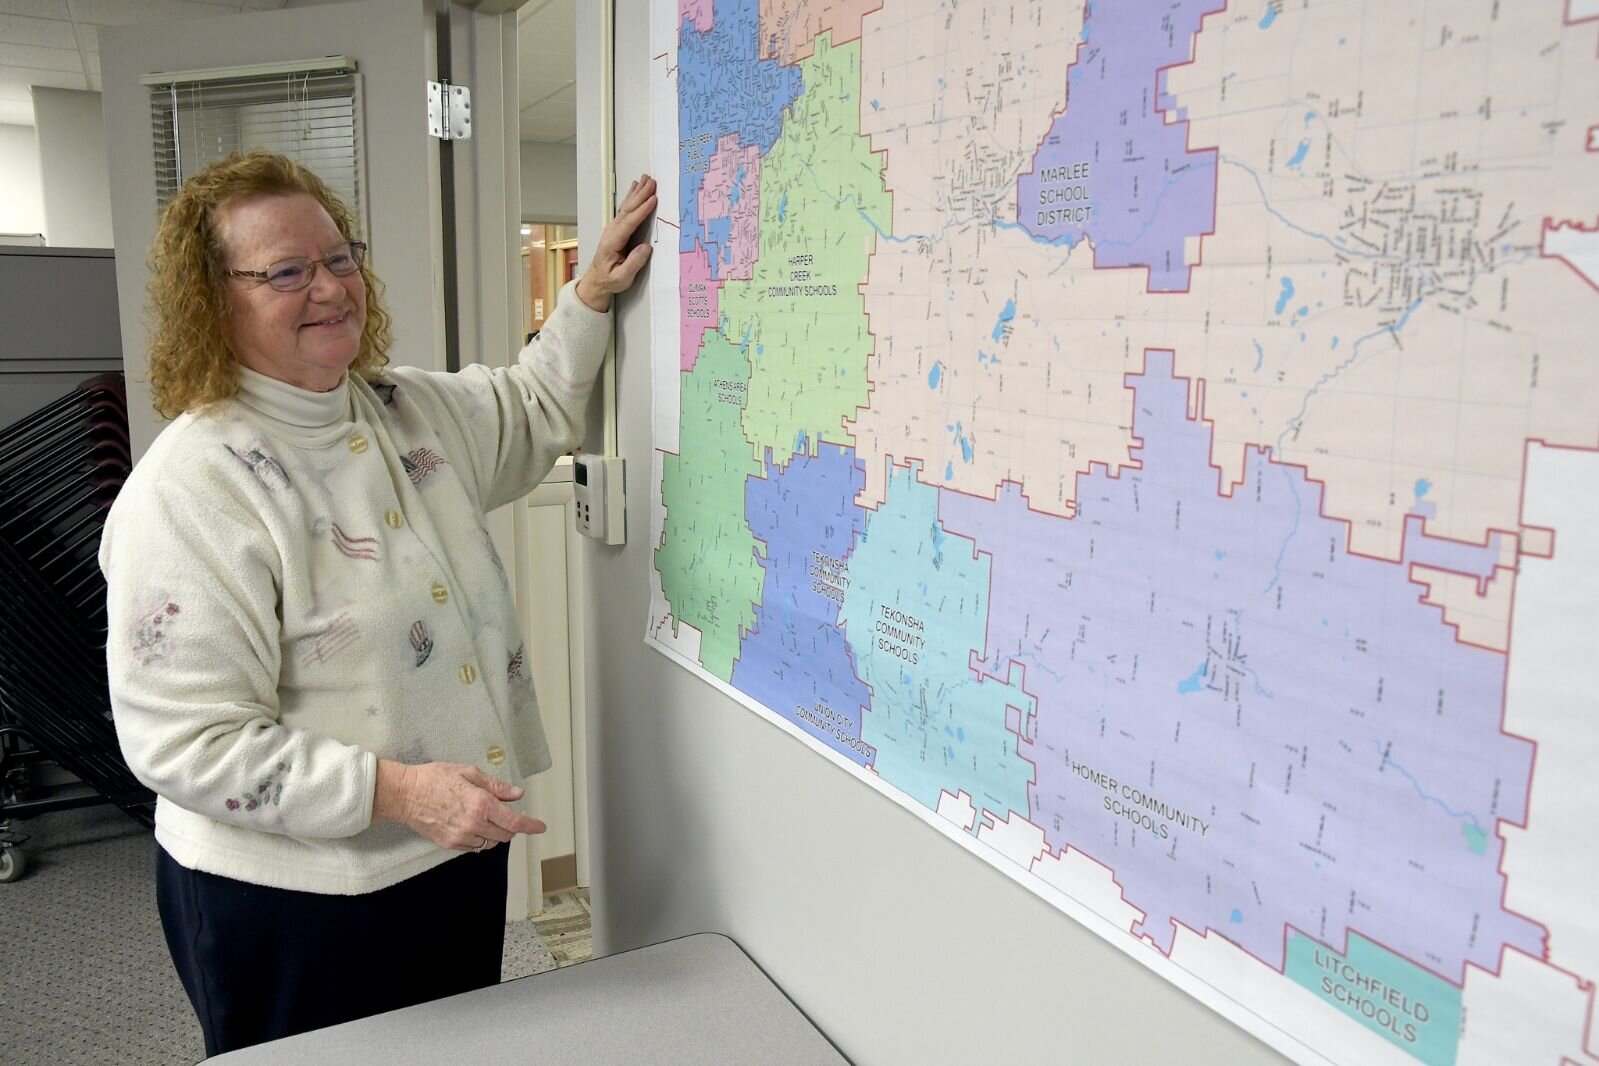 Teri Loew, Chief Deputy Clerk of Elections for Calhoun County, looks at map of Calhoun County.